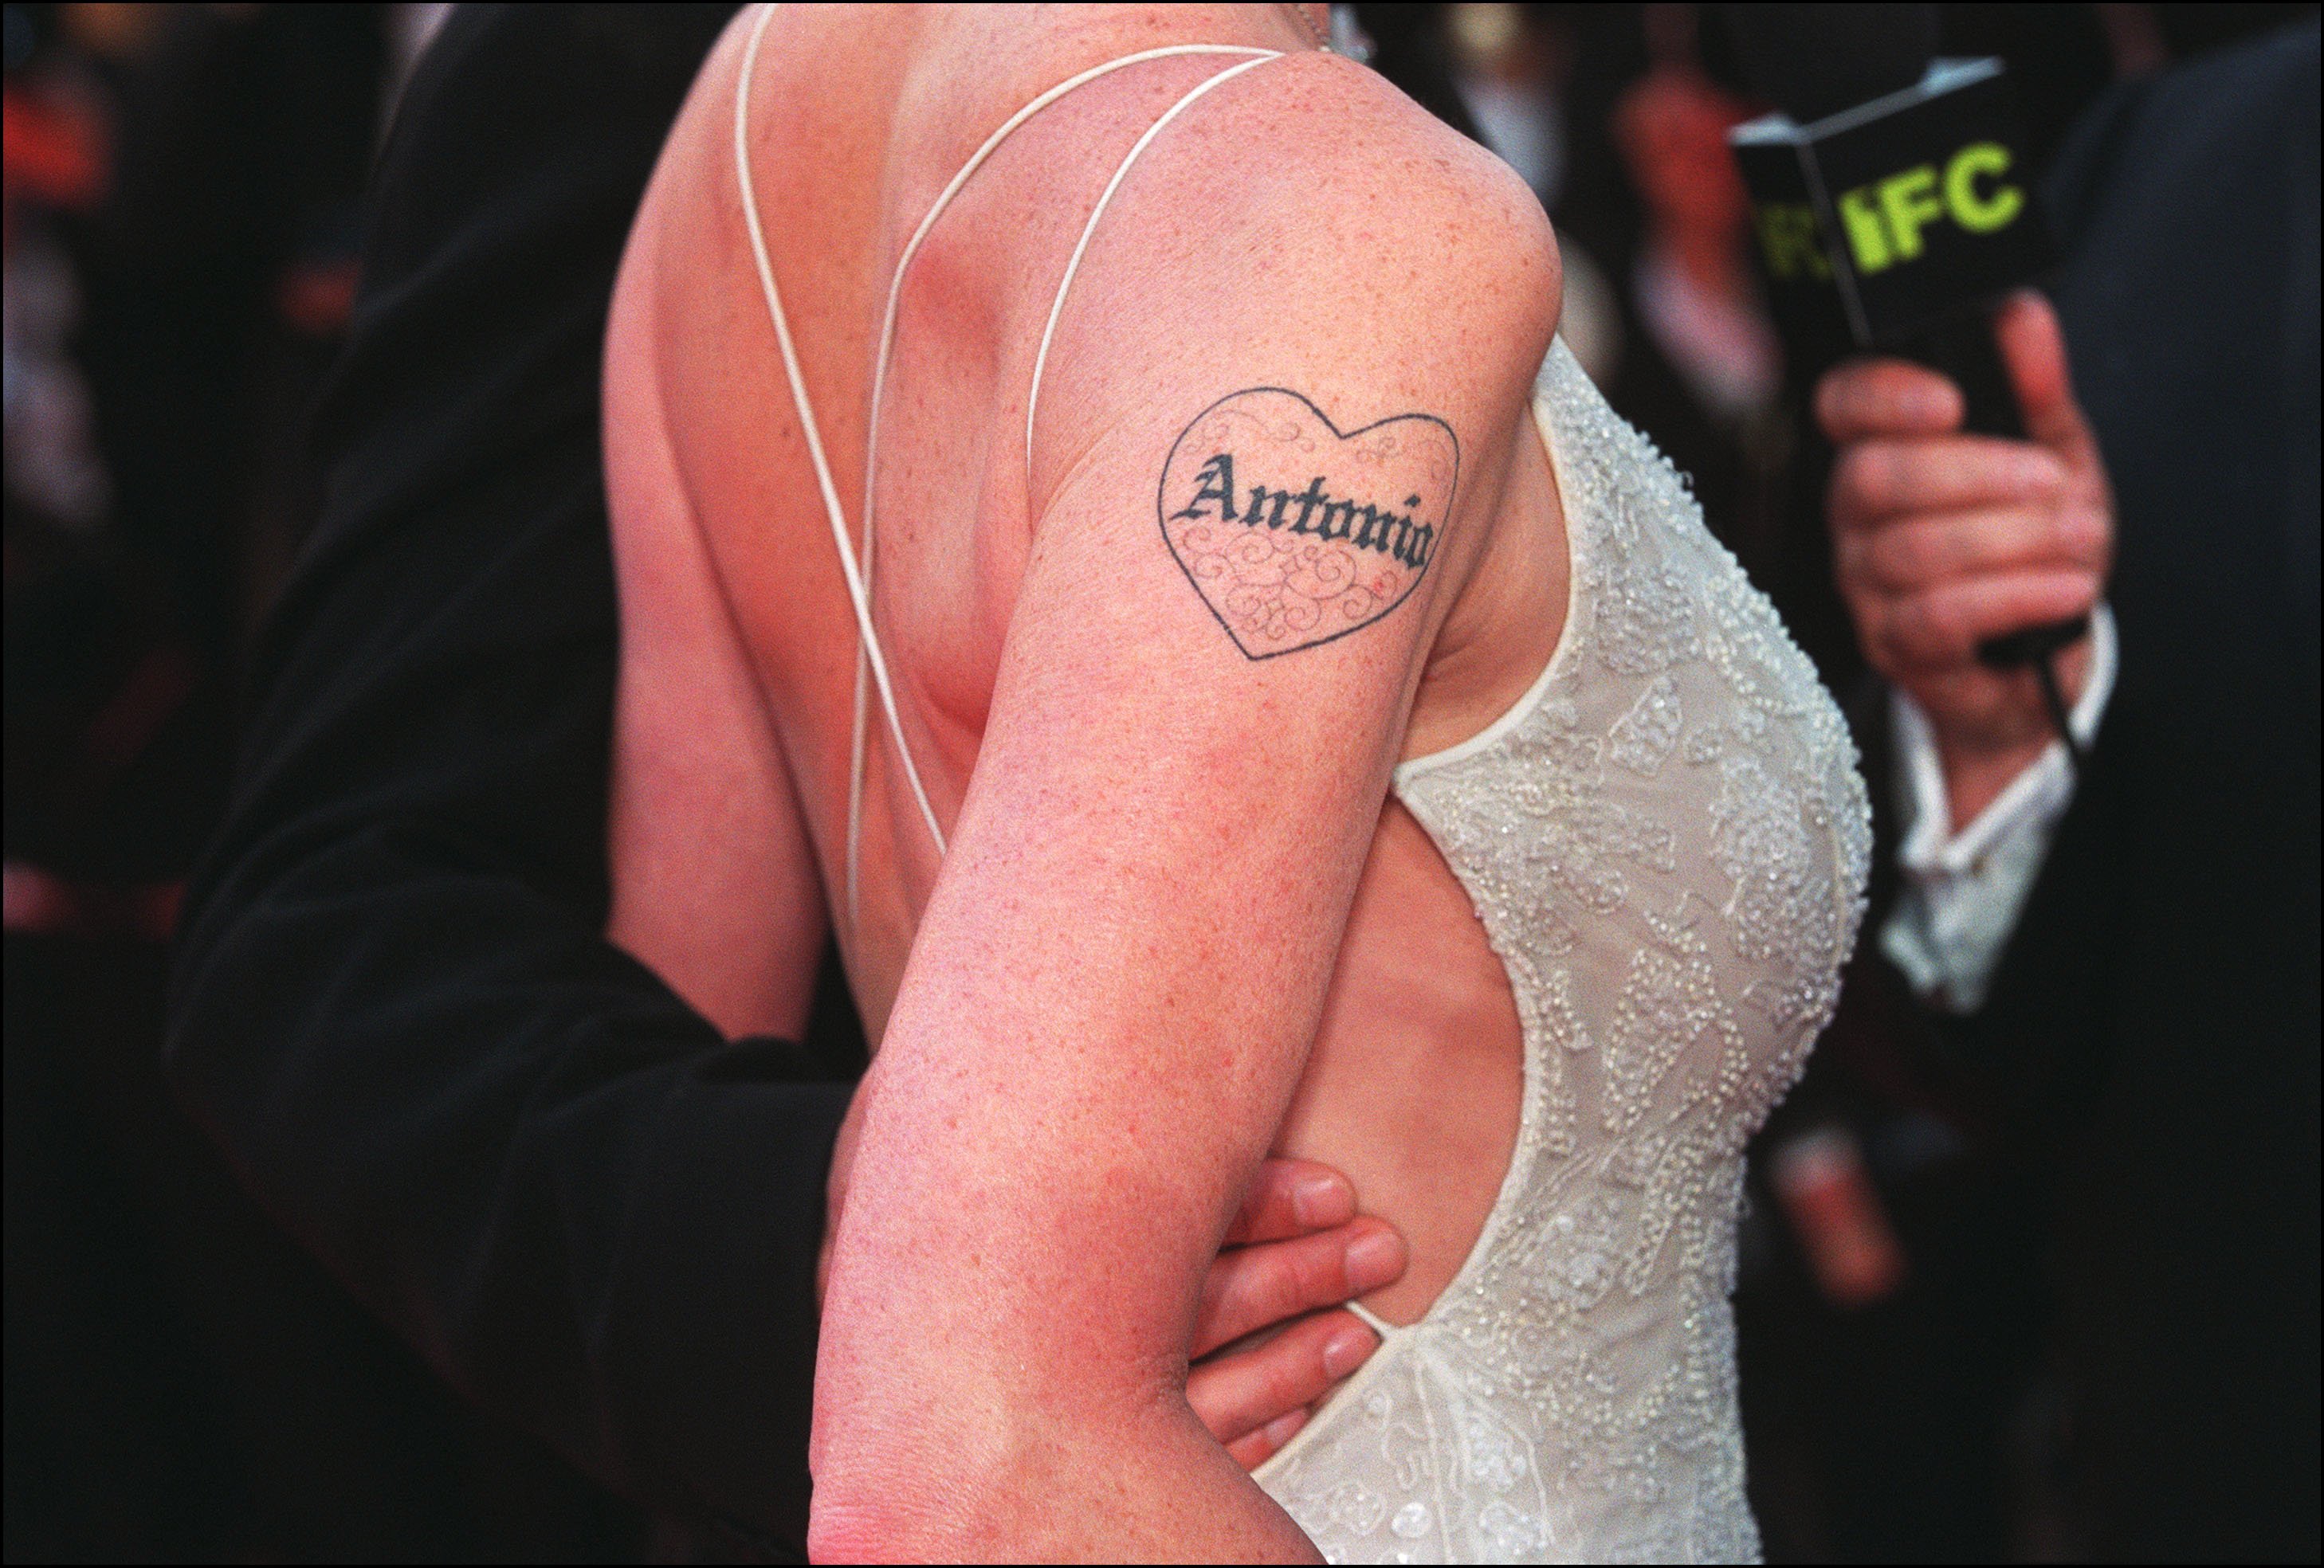 Melanie Griffith at the 54th Cannes Festival on May 20 2001, in France. | Source: Getty Images